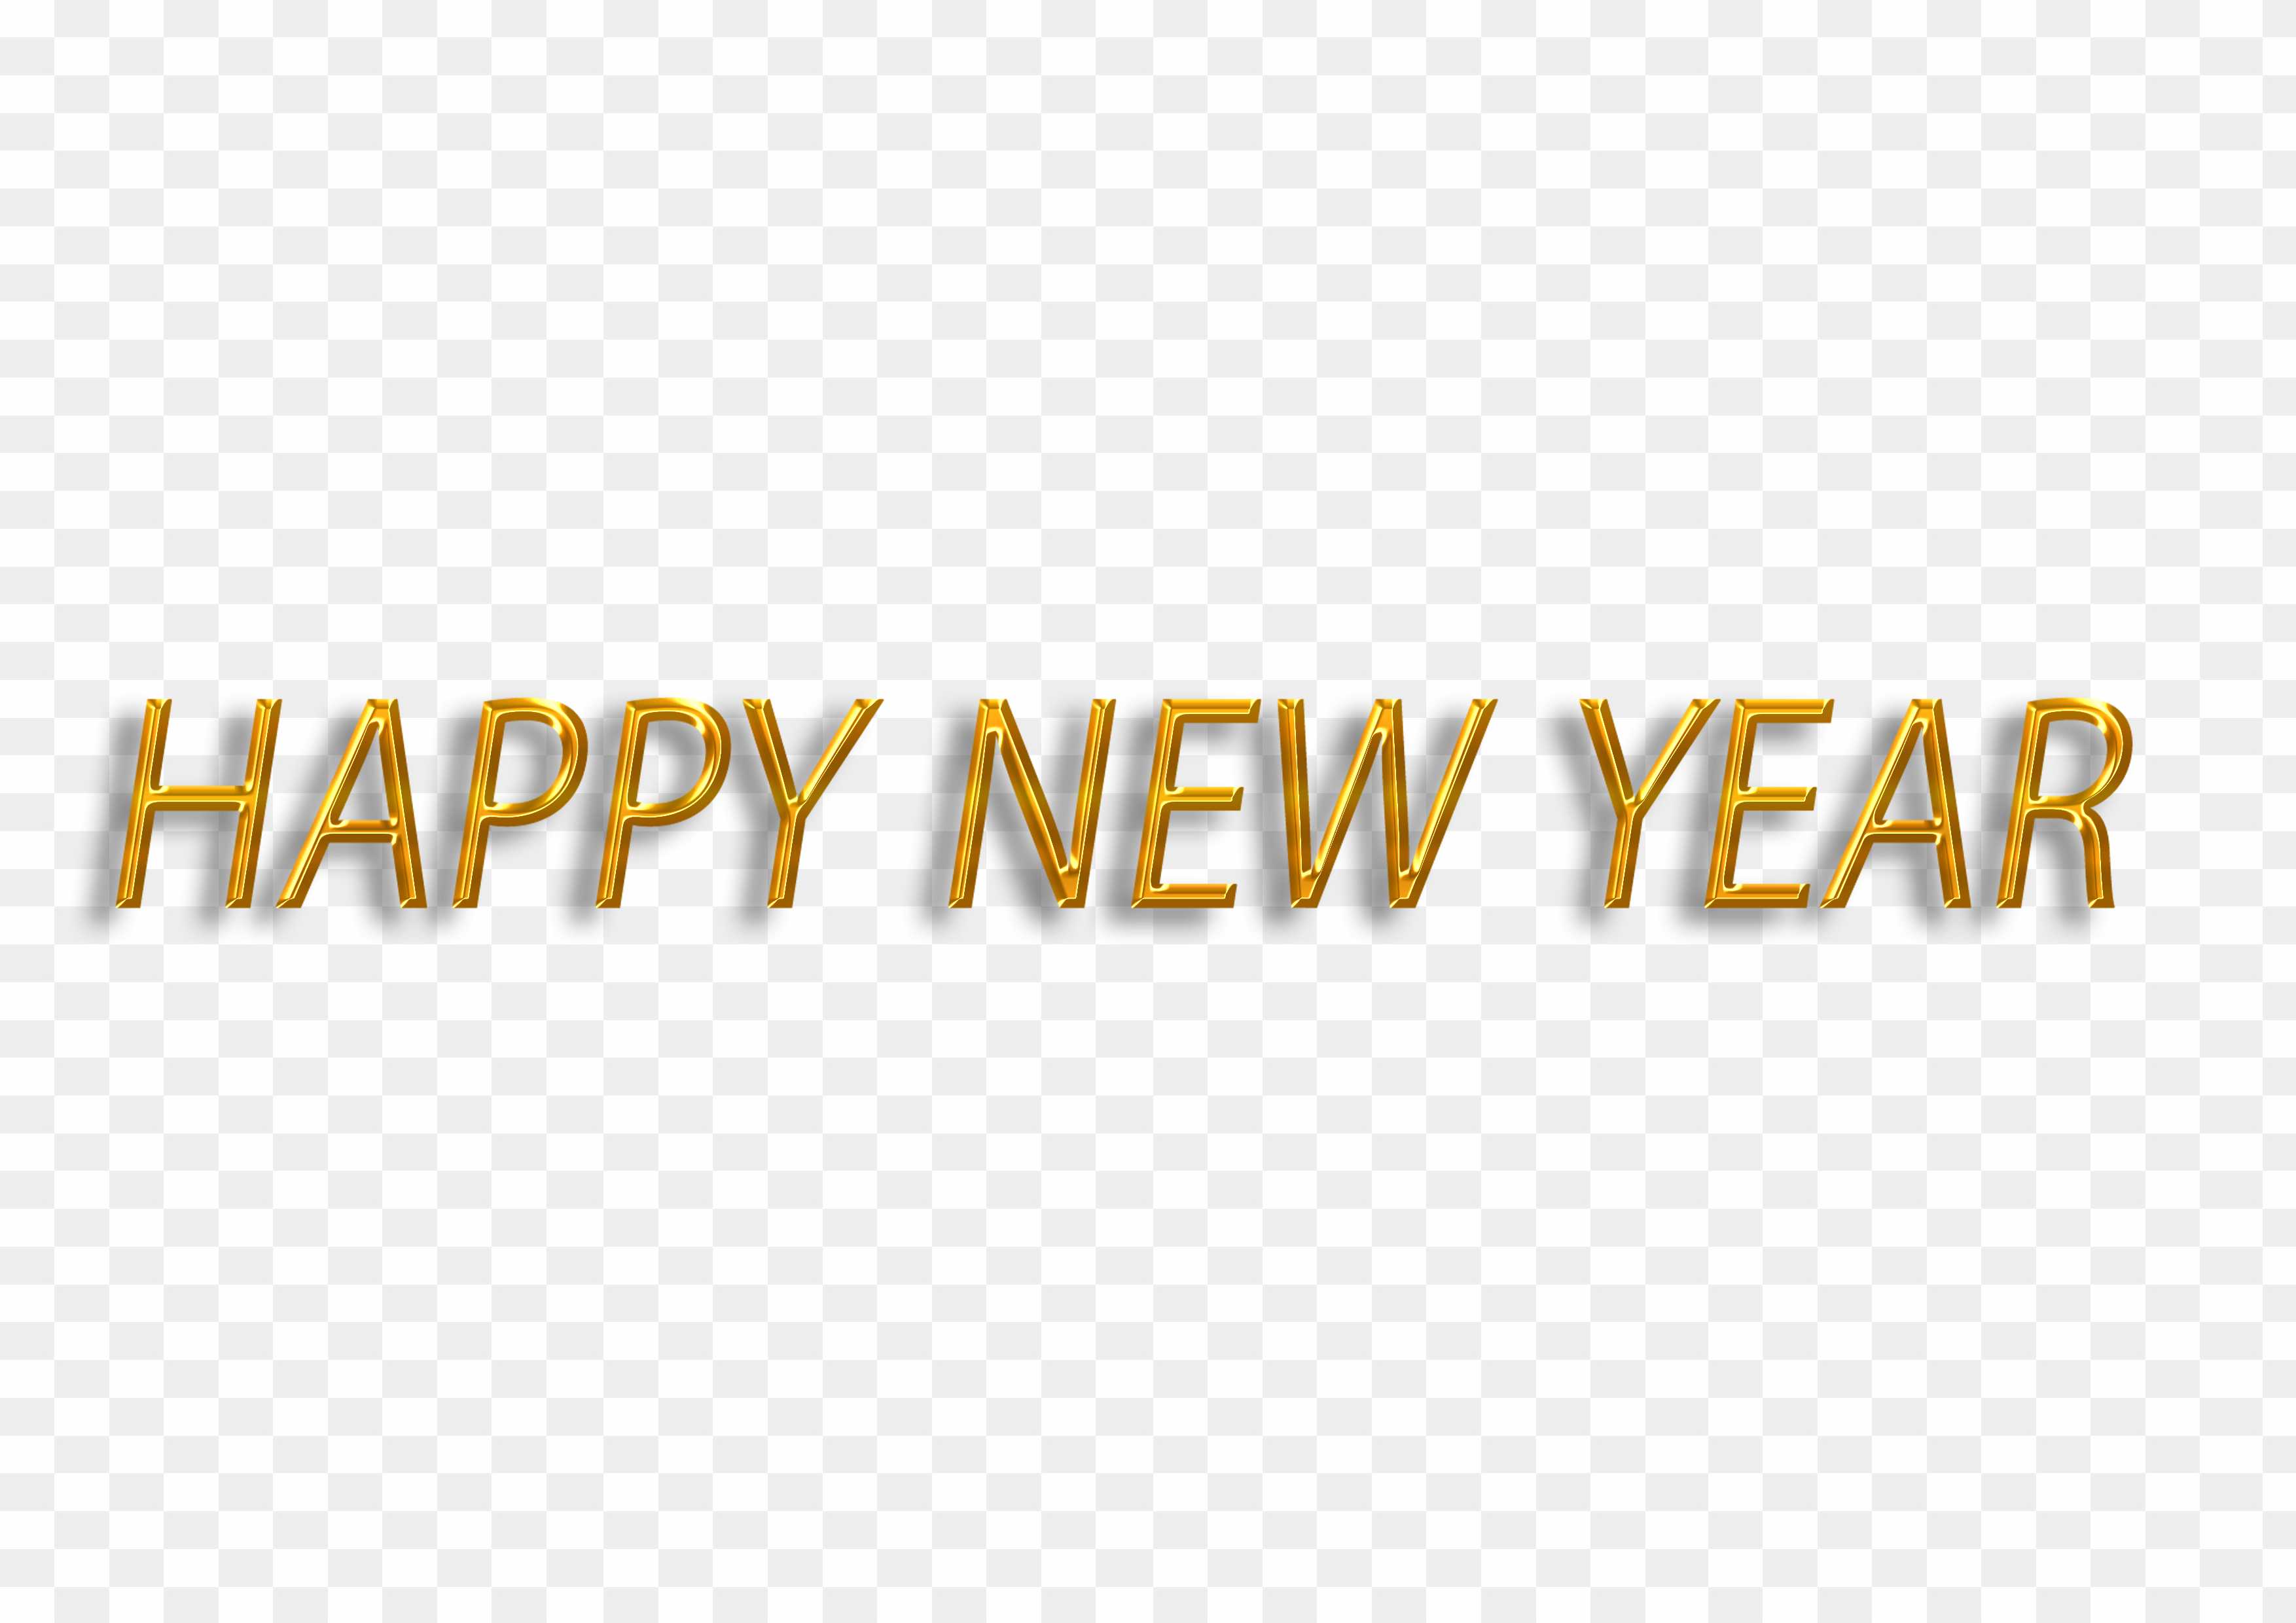 happy new year png golden text images download